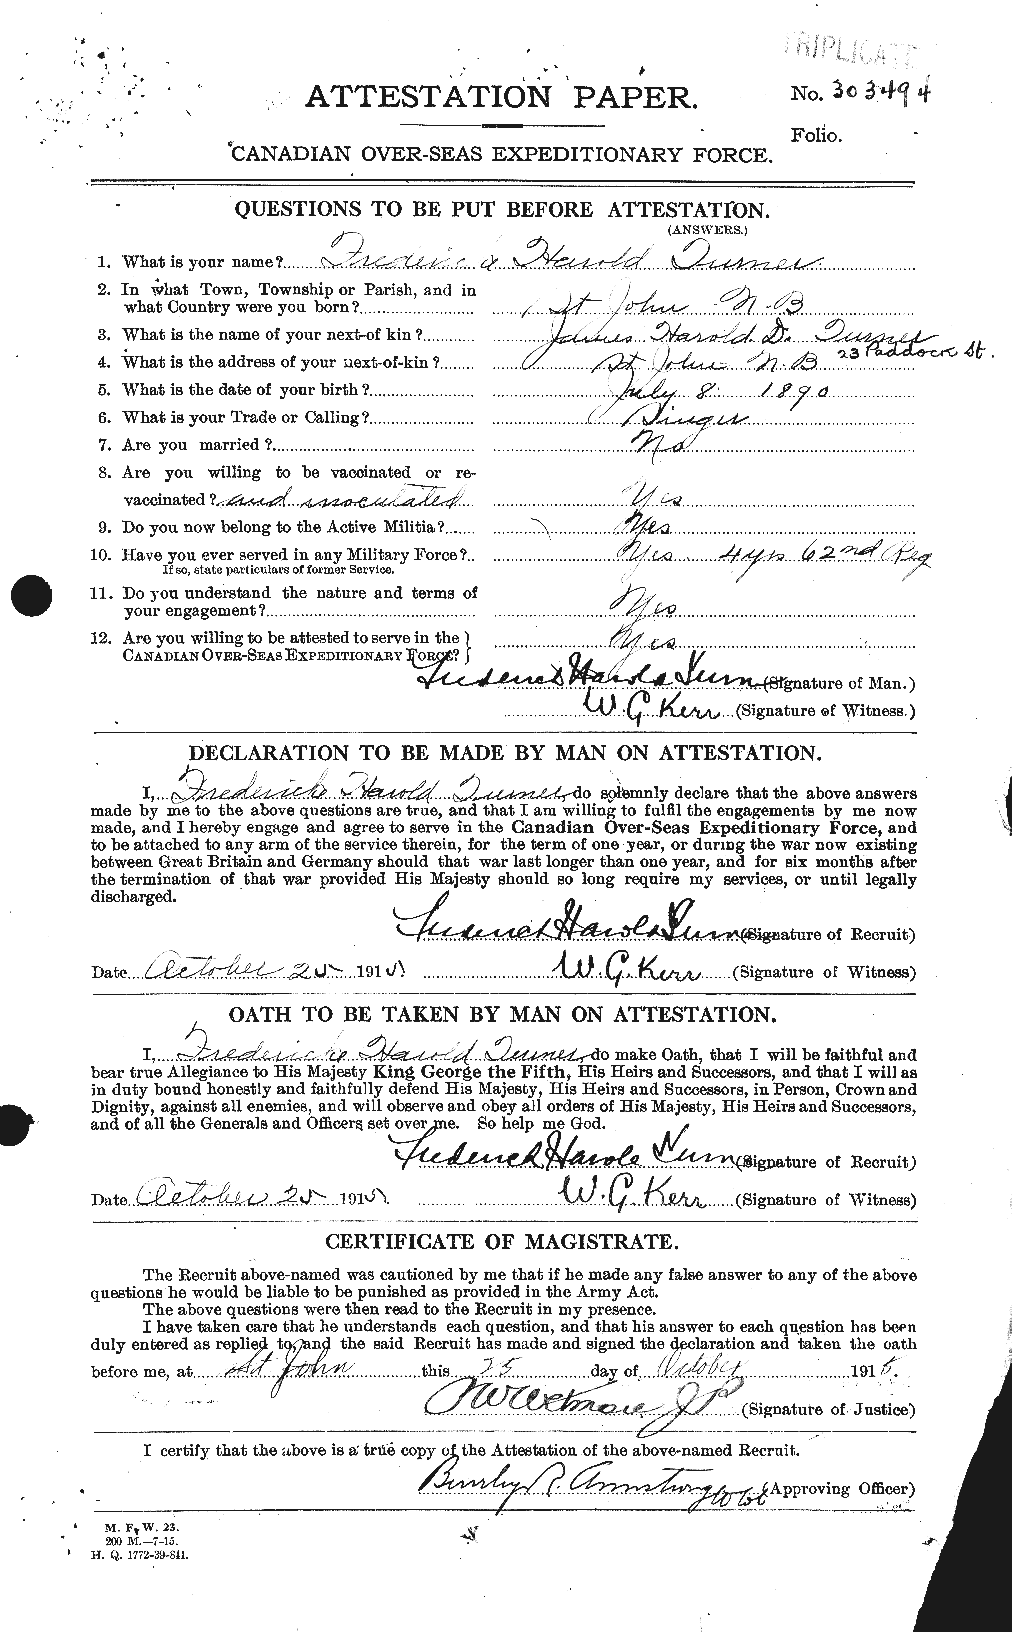 Personnel Records of the First World War - CEF 648478a